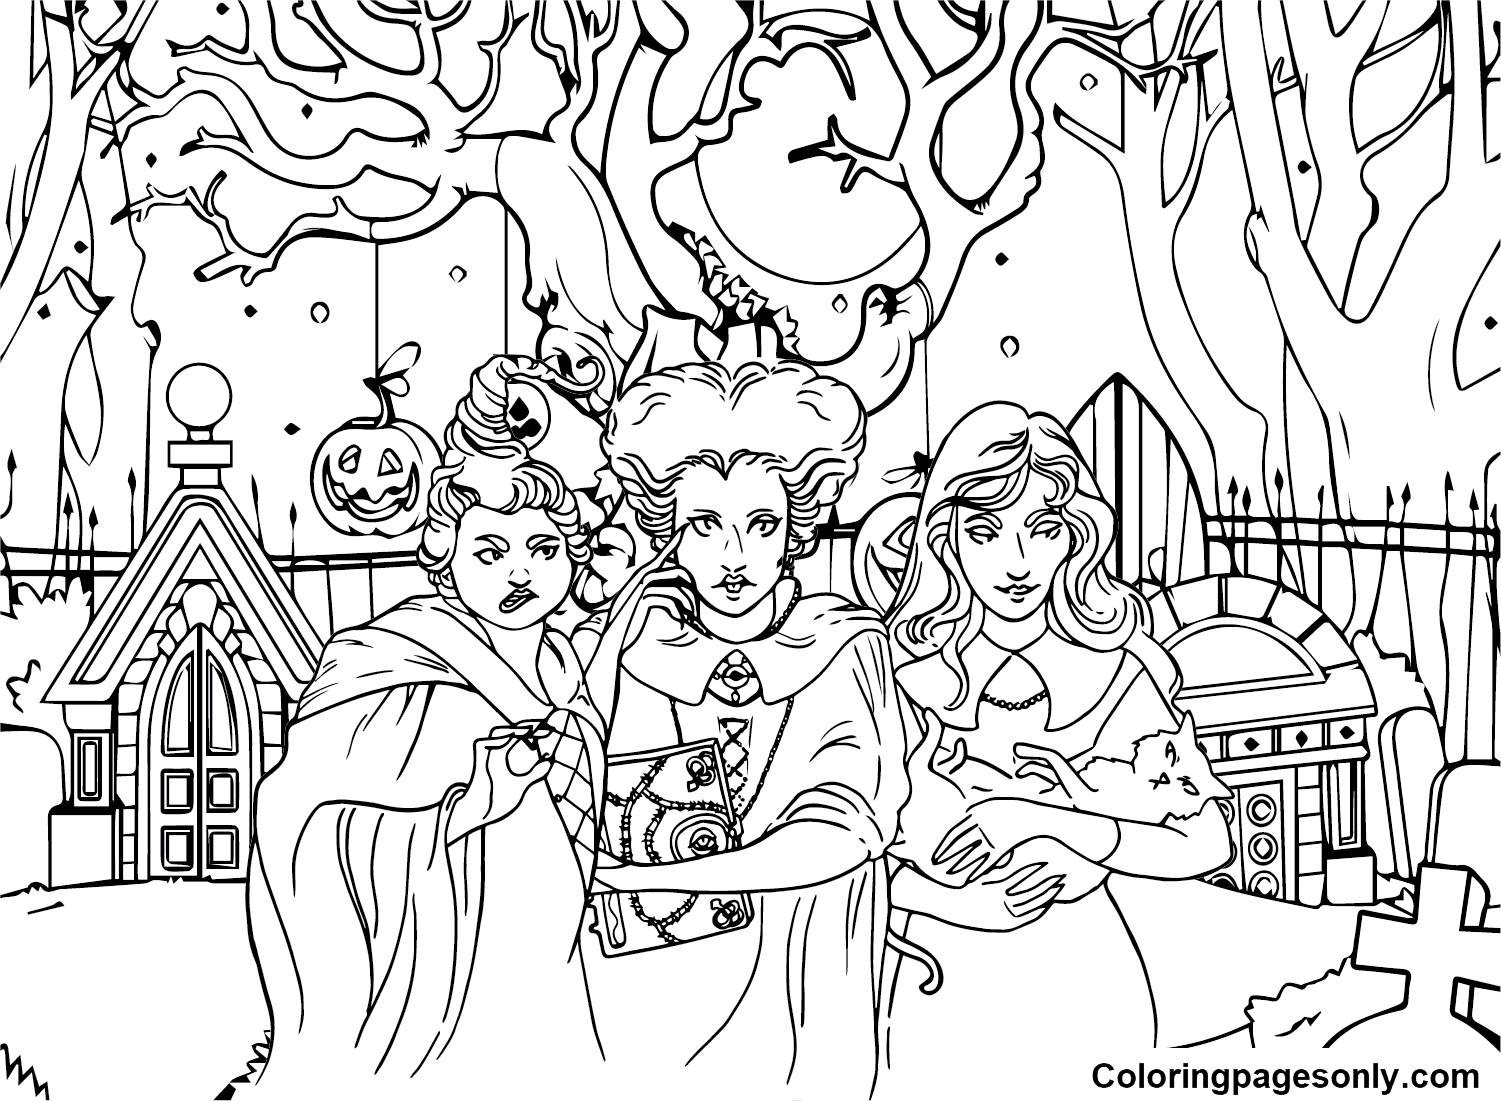 hocus-pocus-coloring-pages-printable-for-free-download